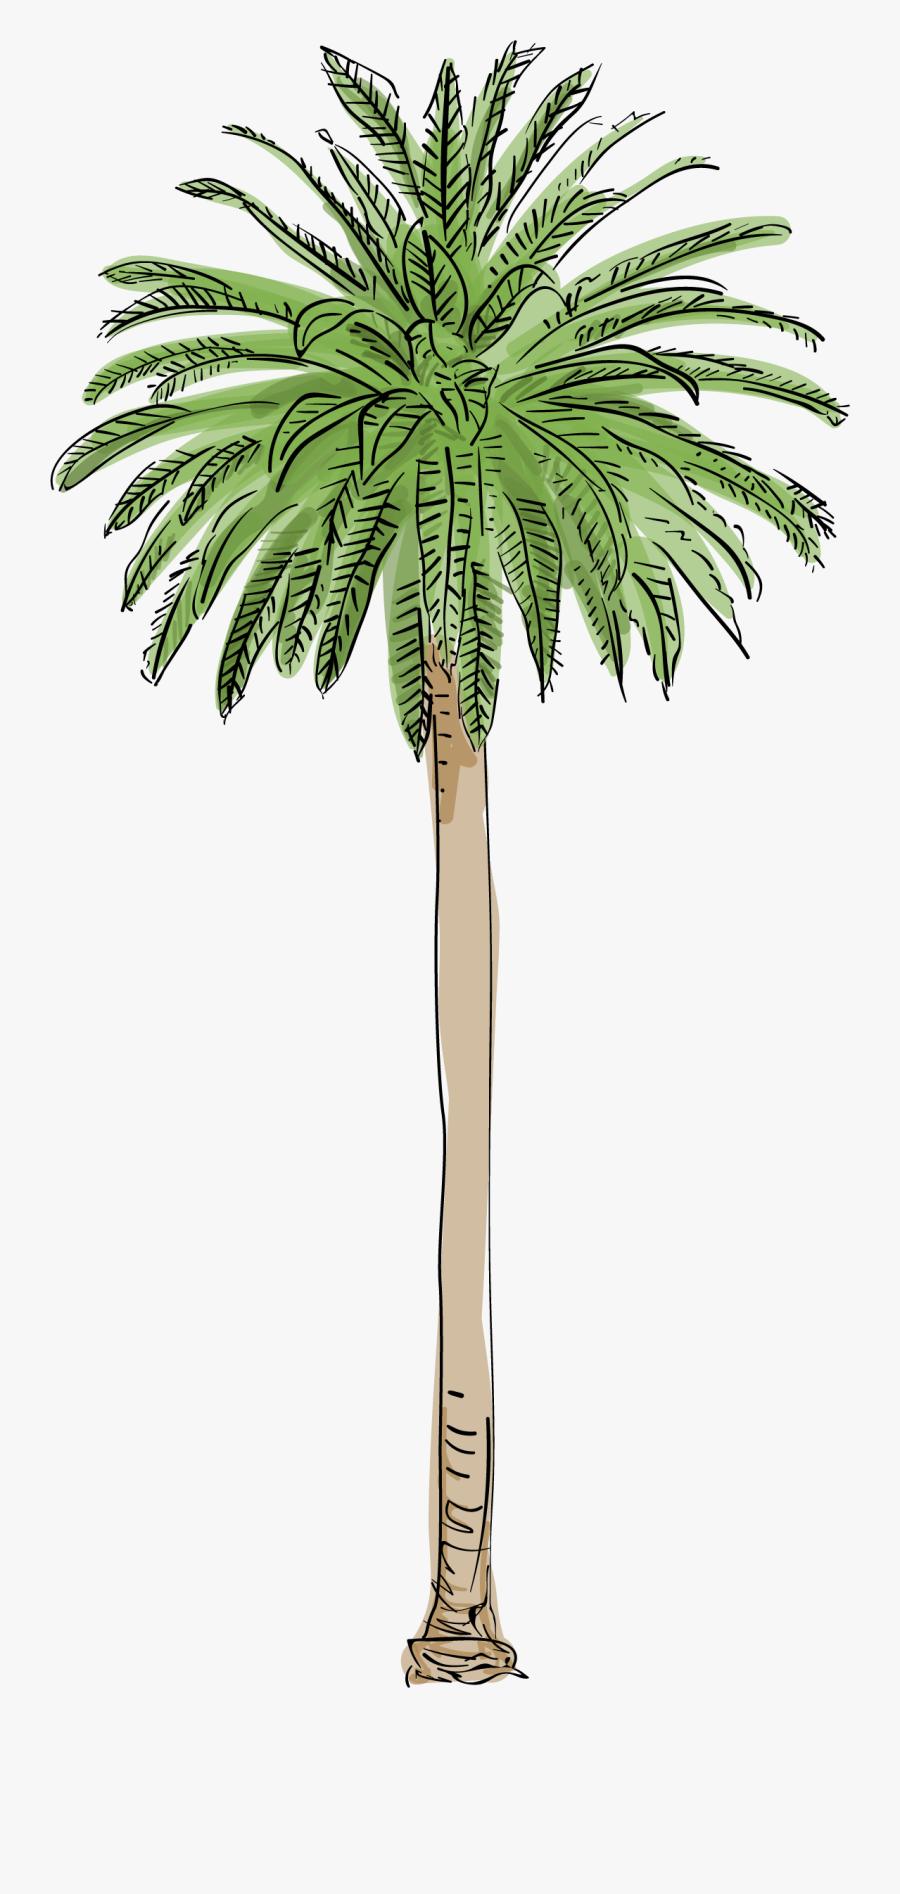 Clip Art L A S Trees - Canary Island Date Palm Png, Transparent Clipart